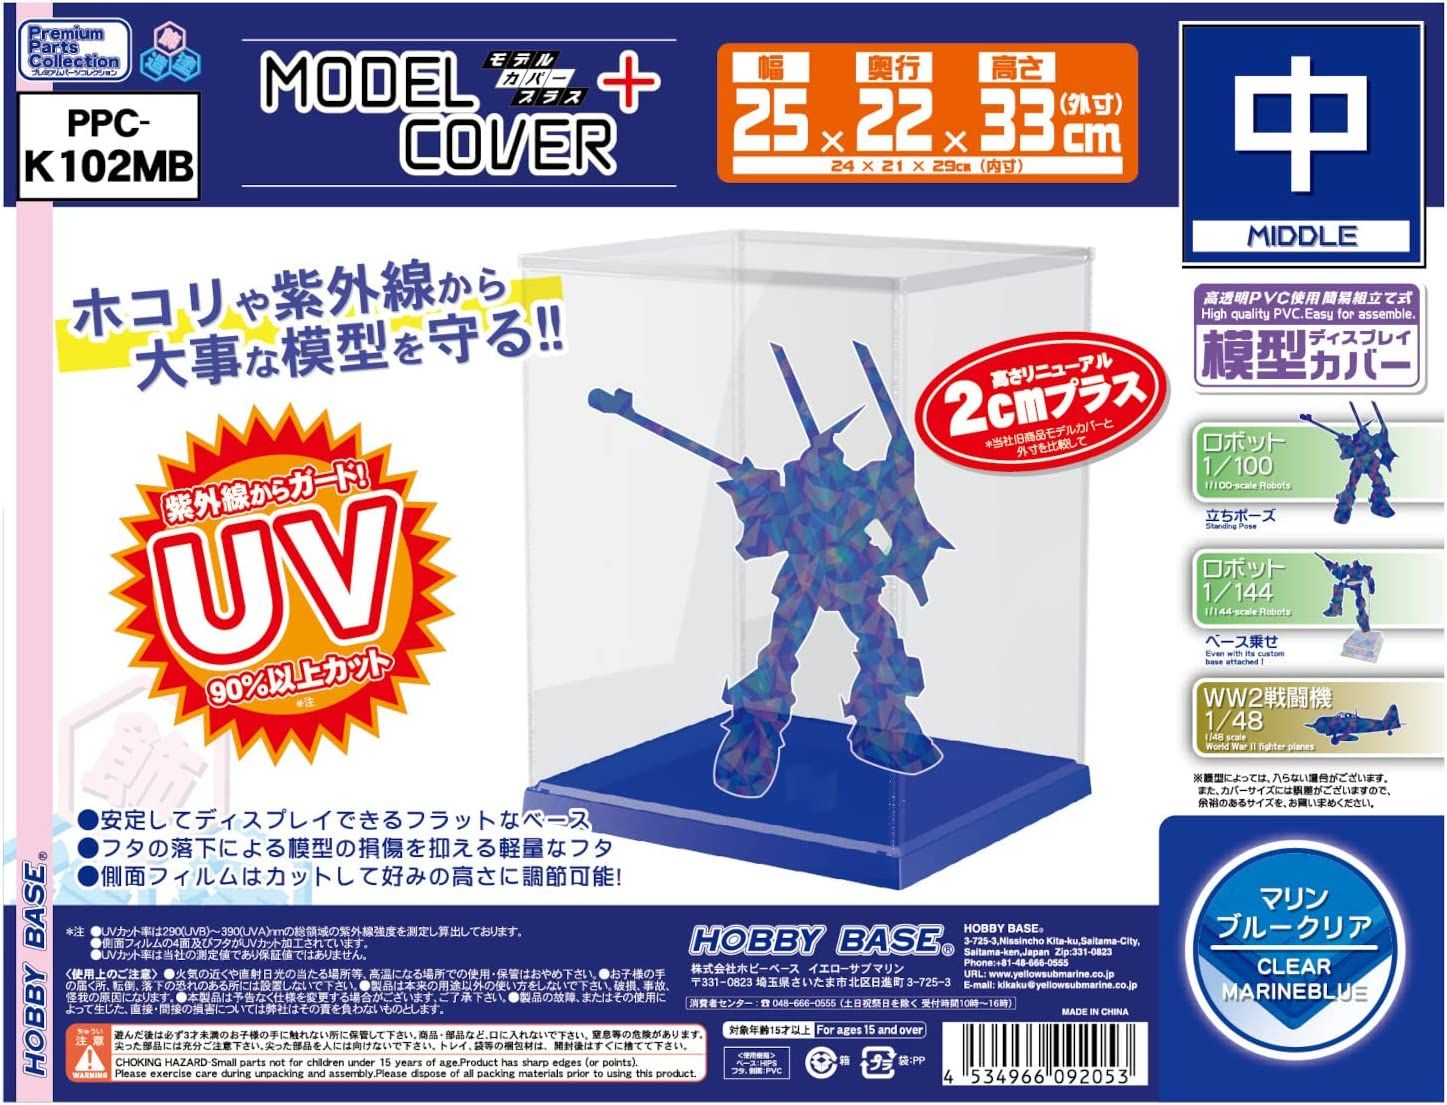 Hobby Base K102MB Model Cover Plus Middle Clear Marine Blue - BanzaiHobby